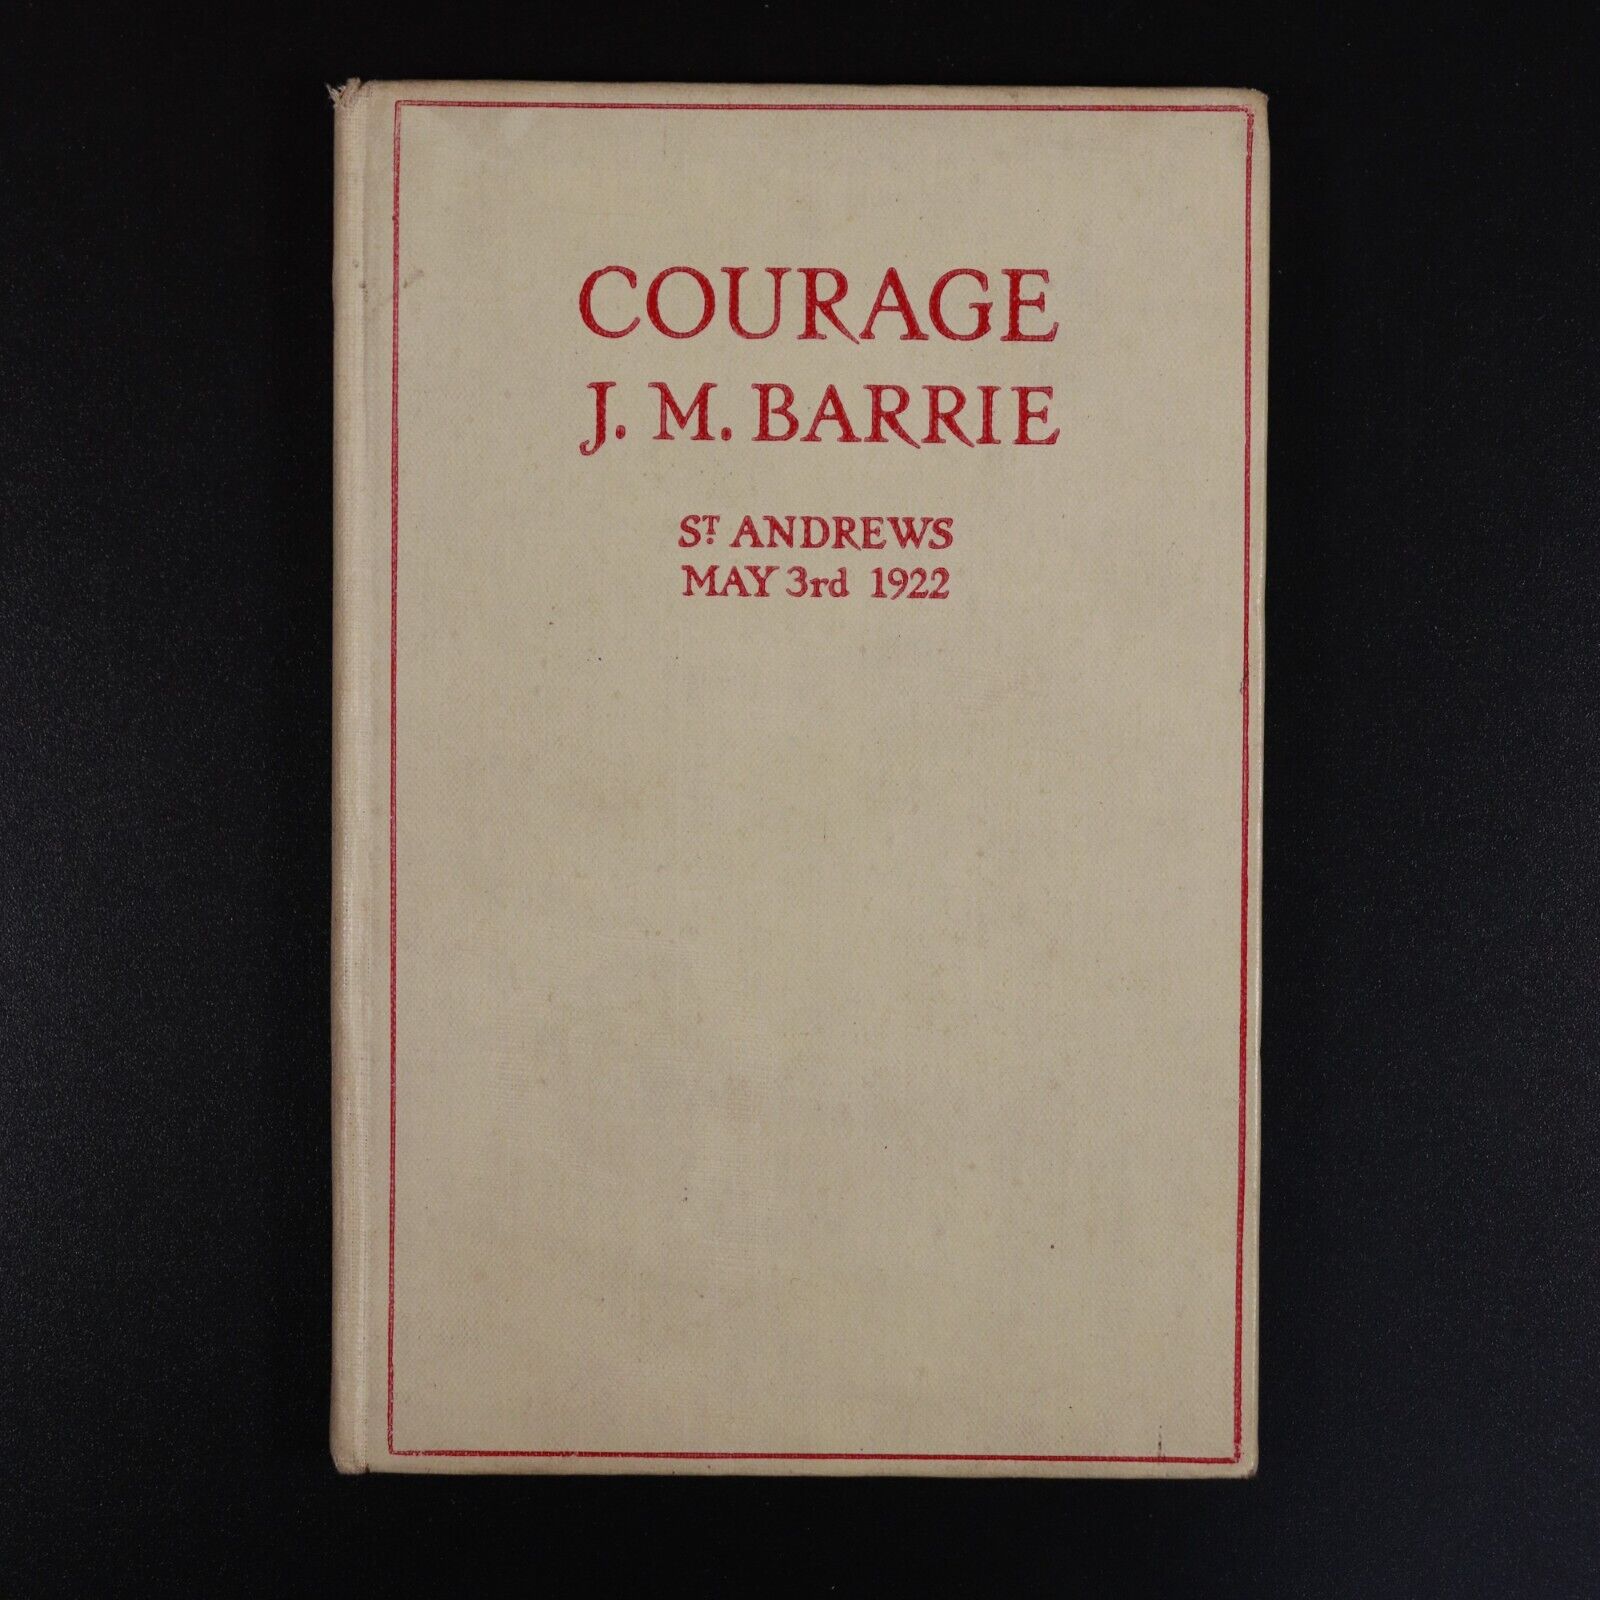 1922 Courage by J.M. Barrie Rectoral Address At St Andrews Antique Book